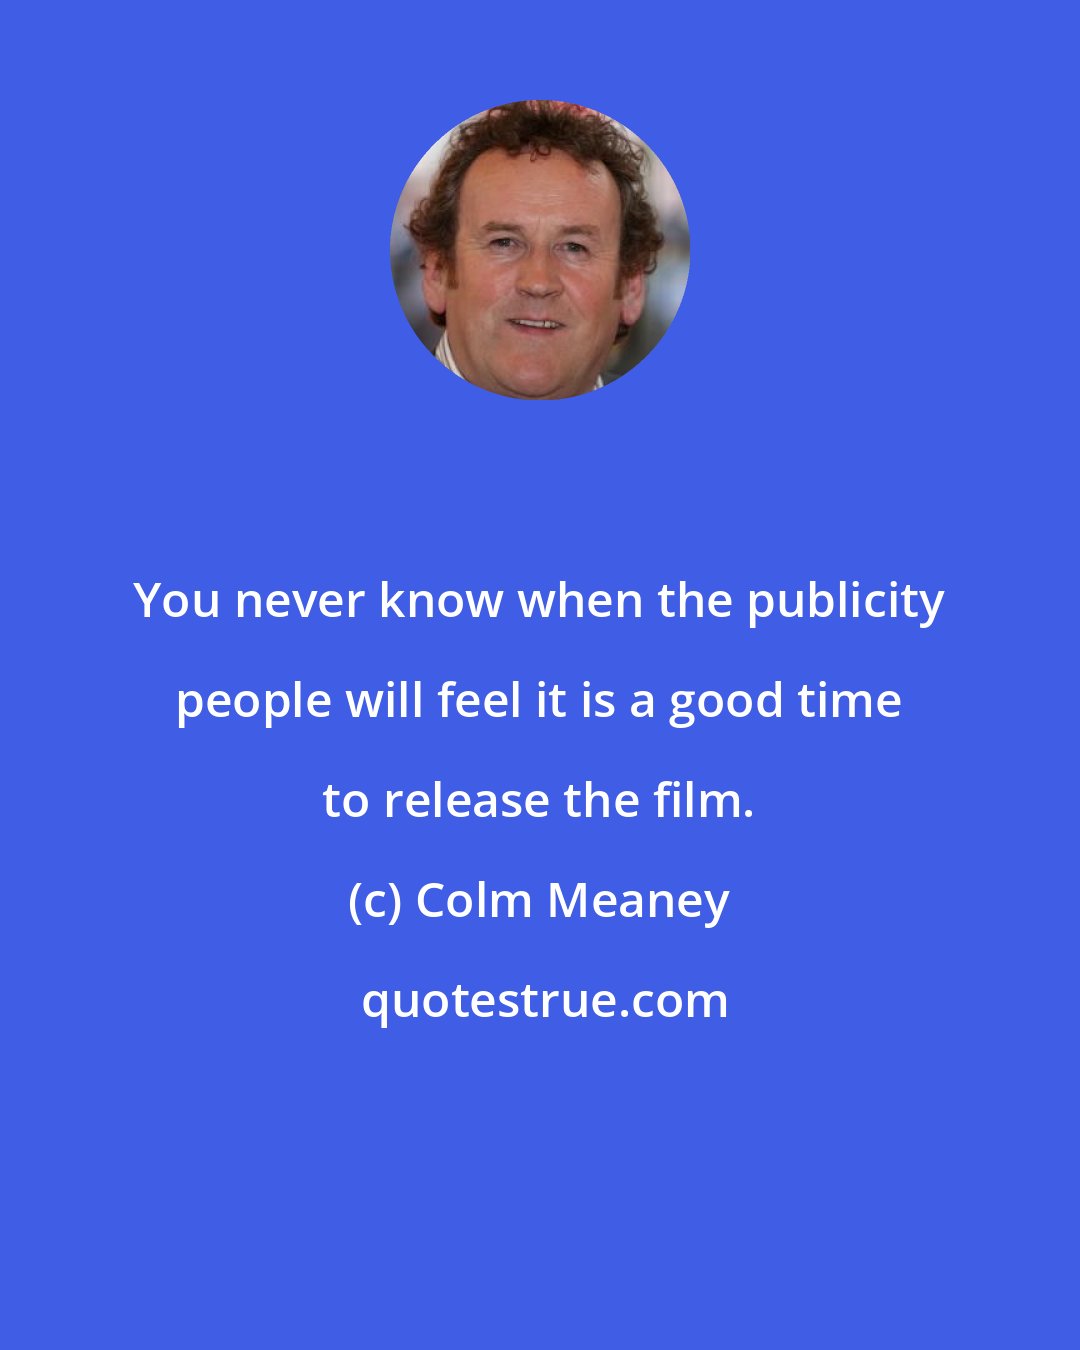 Colm Meaney: You never know when the publicity people will feel it is a good time to release the film.